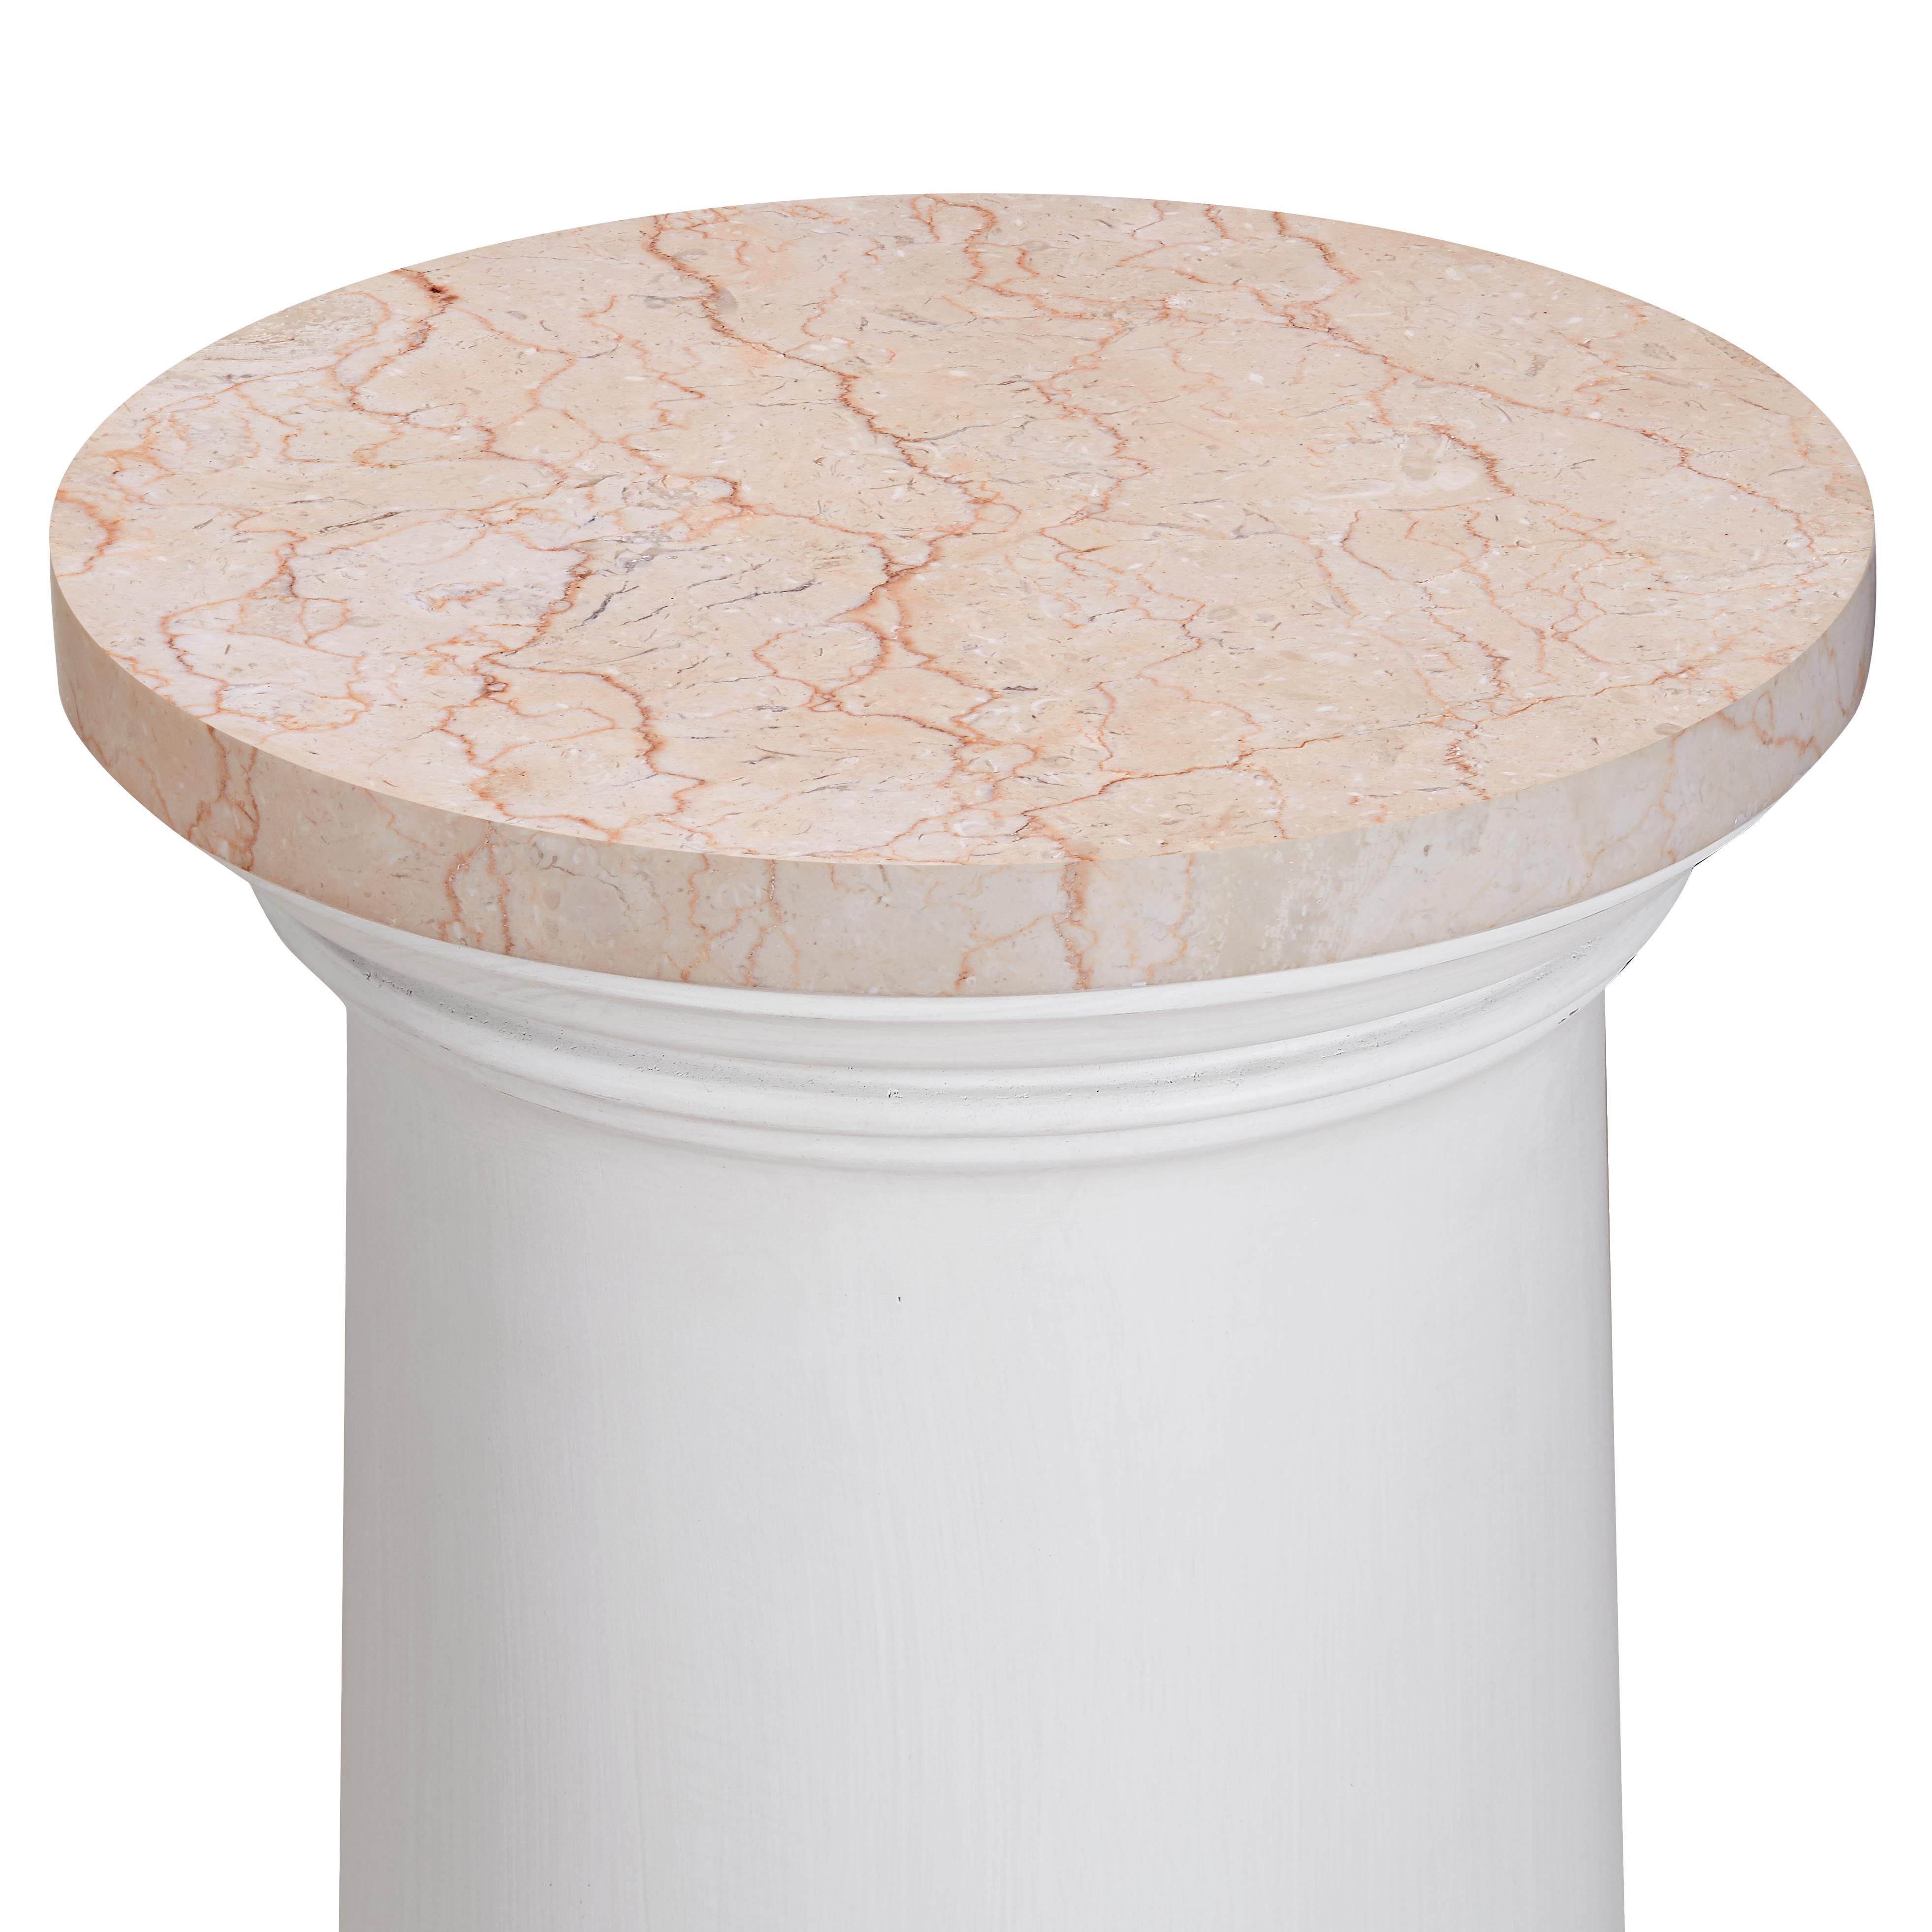 A circular pedestal drinks table, with a calm, chalk white painted finish. Its capital top shows off a honed marble perfectly scaled for a morning cup of coffee or afternoon cocktail. Octagonal base.   Suitable for use indoors or on a covered porch,